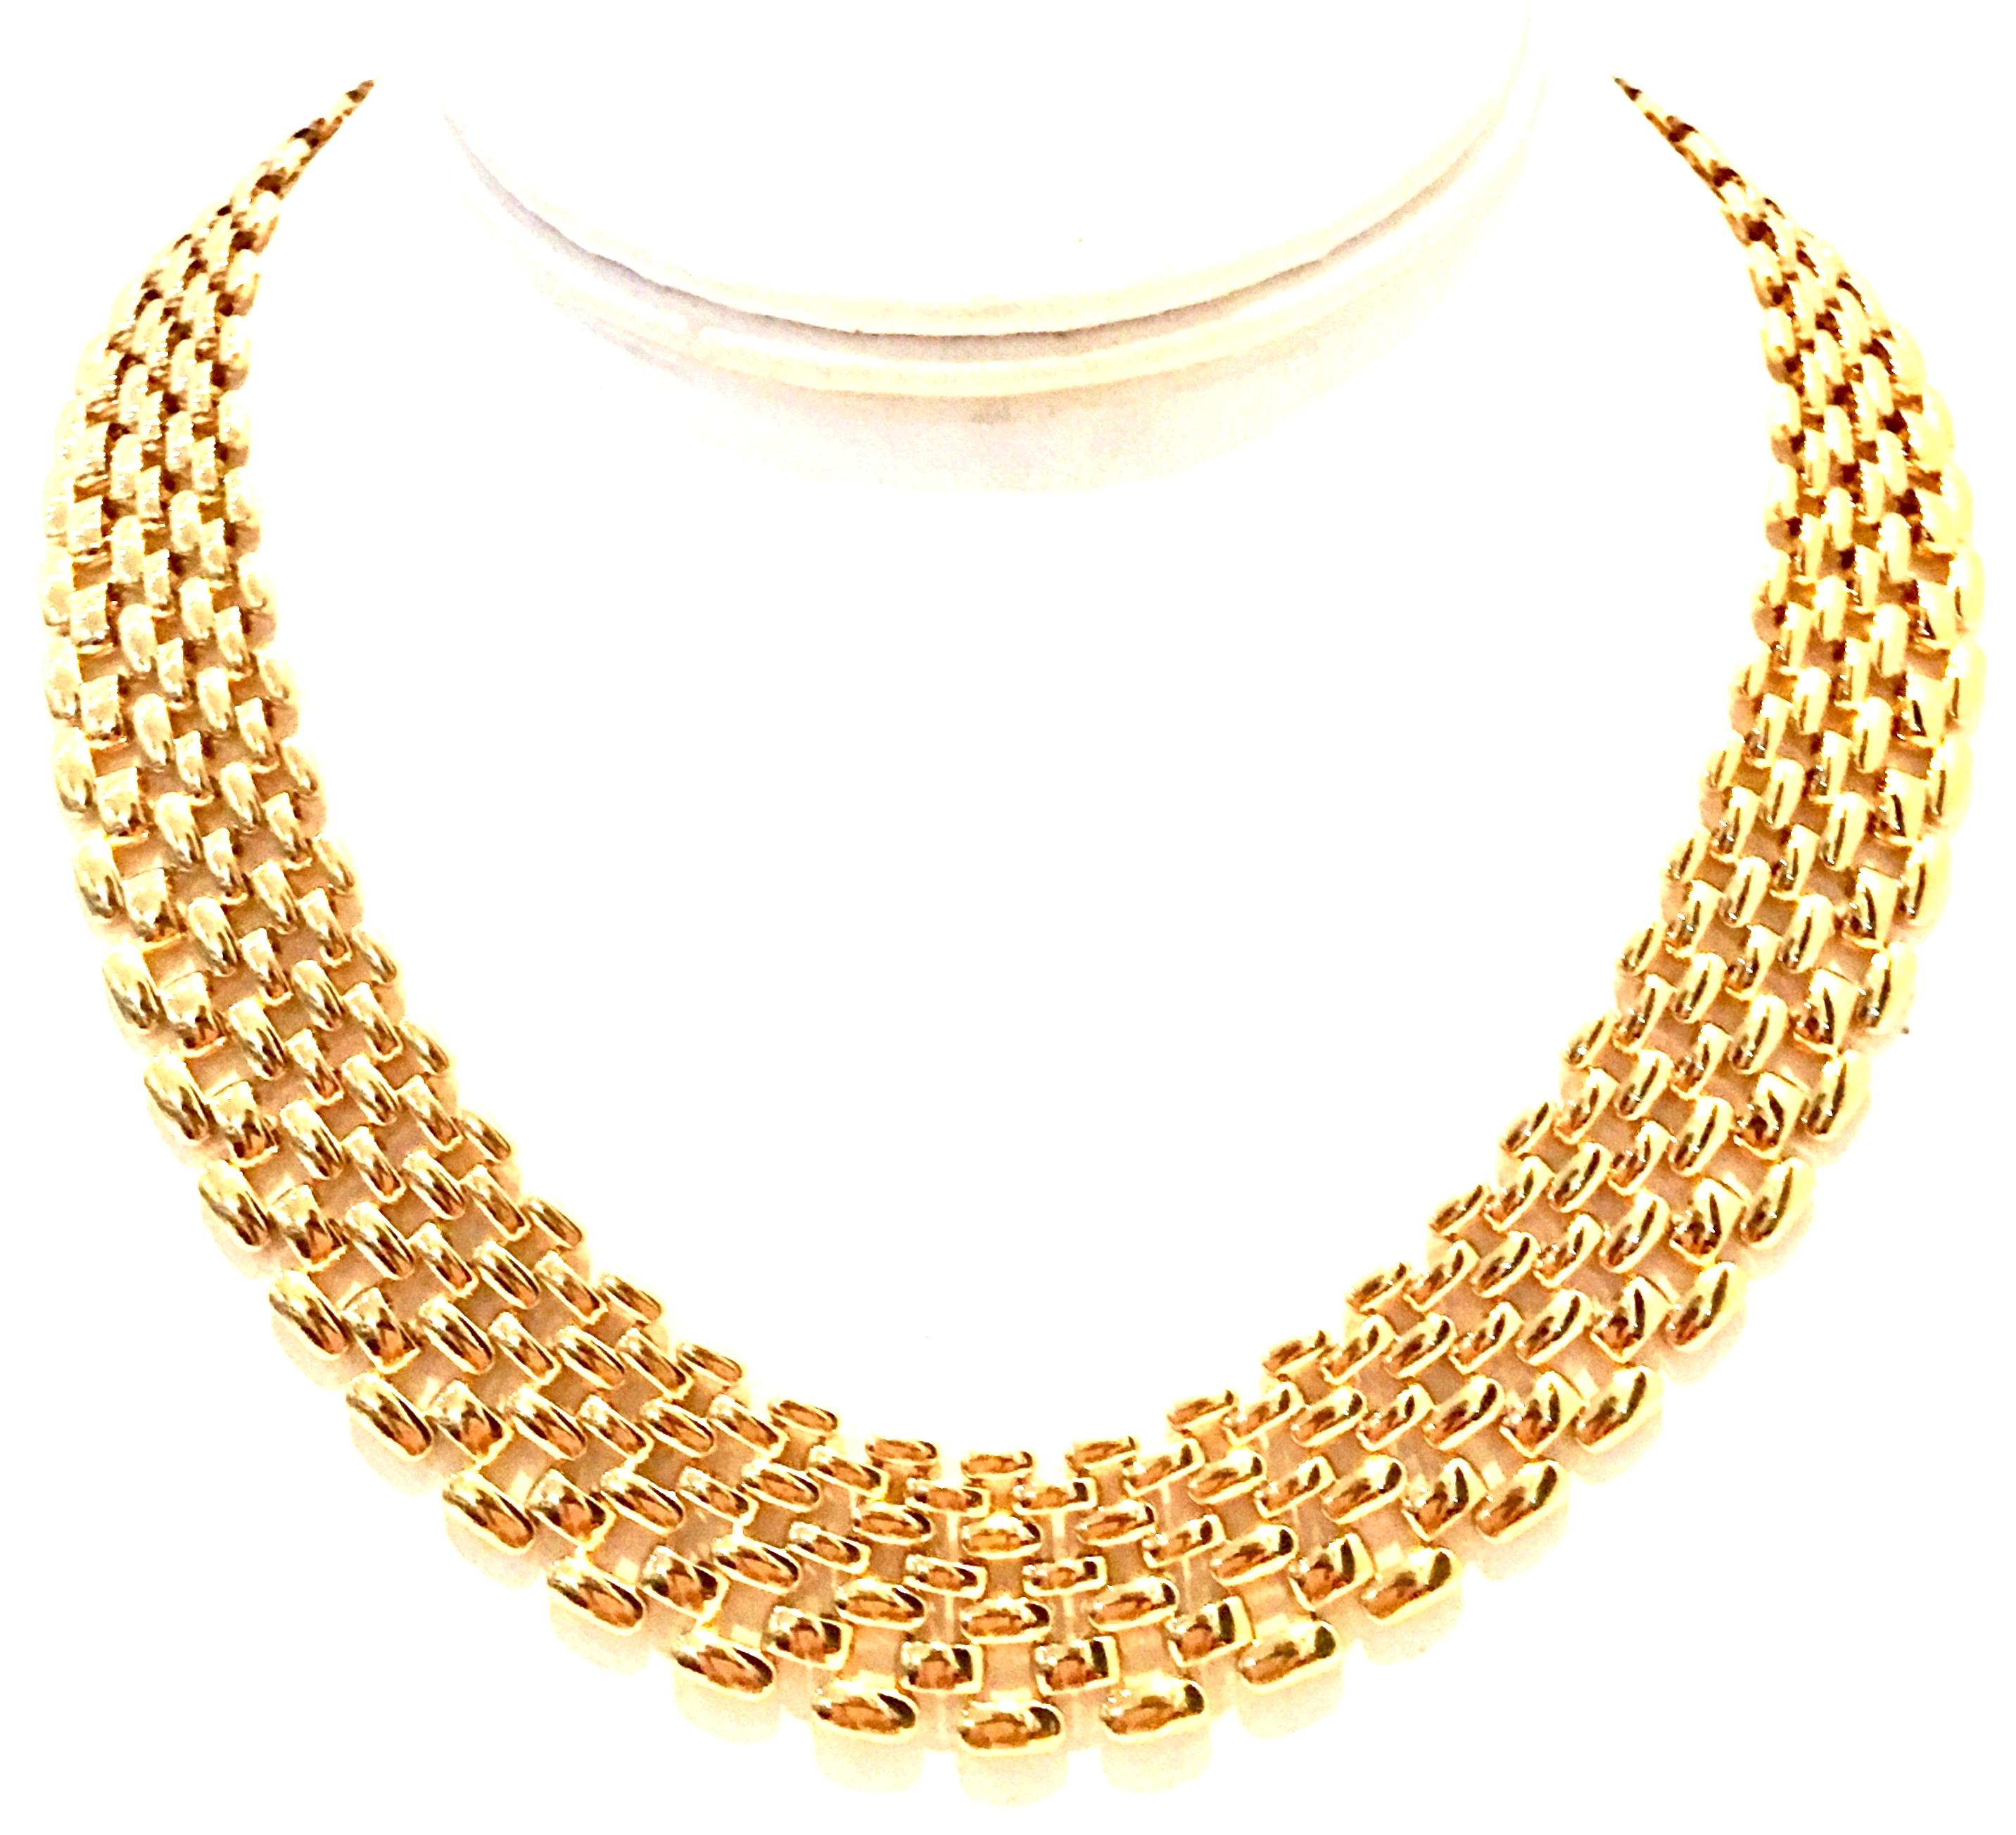 1980'S Gold Plate Link Choker Style Necklace By, Napier. Signed Napier on the fold over box style locking clasp. 